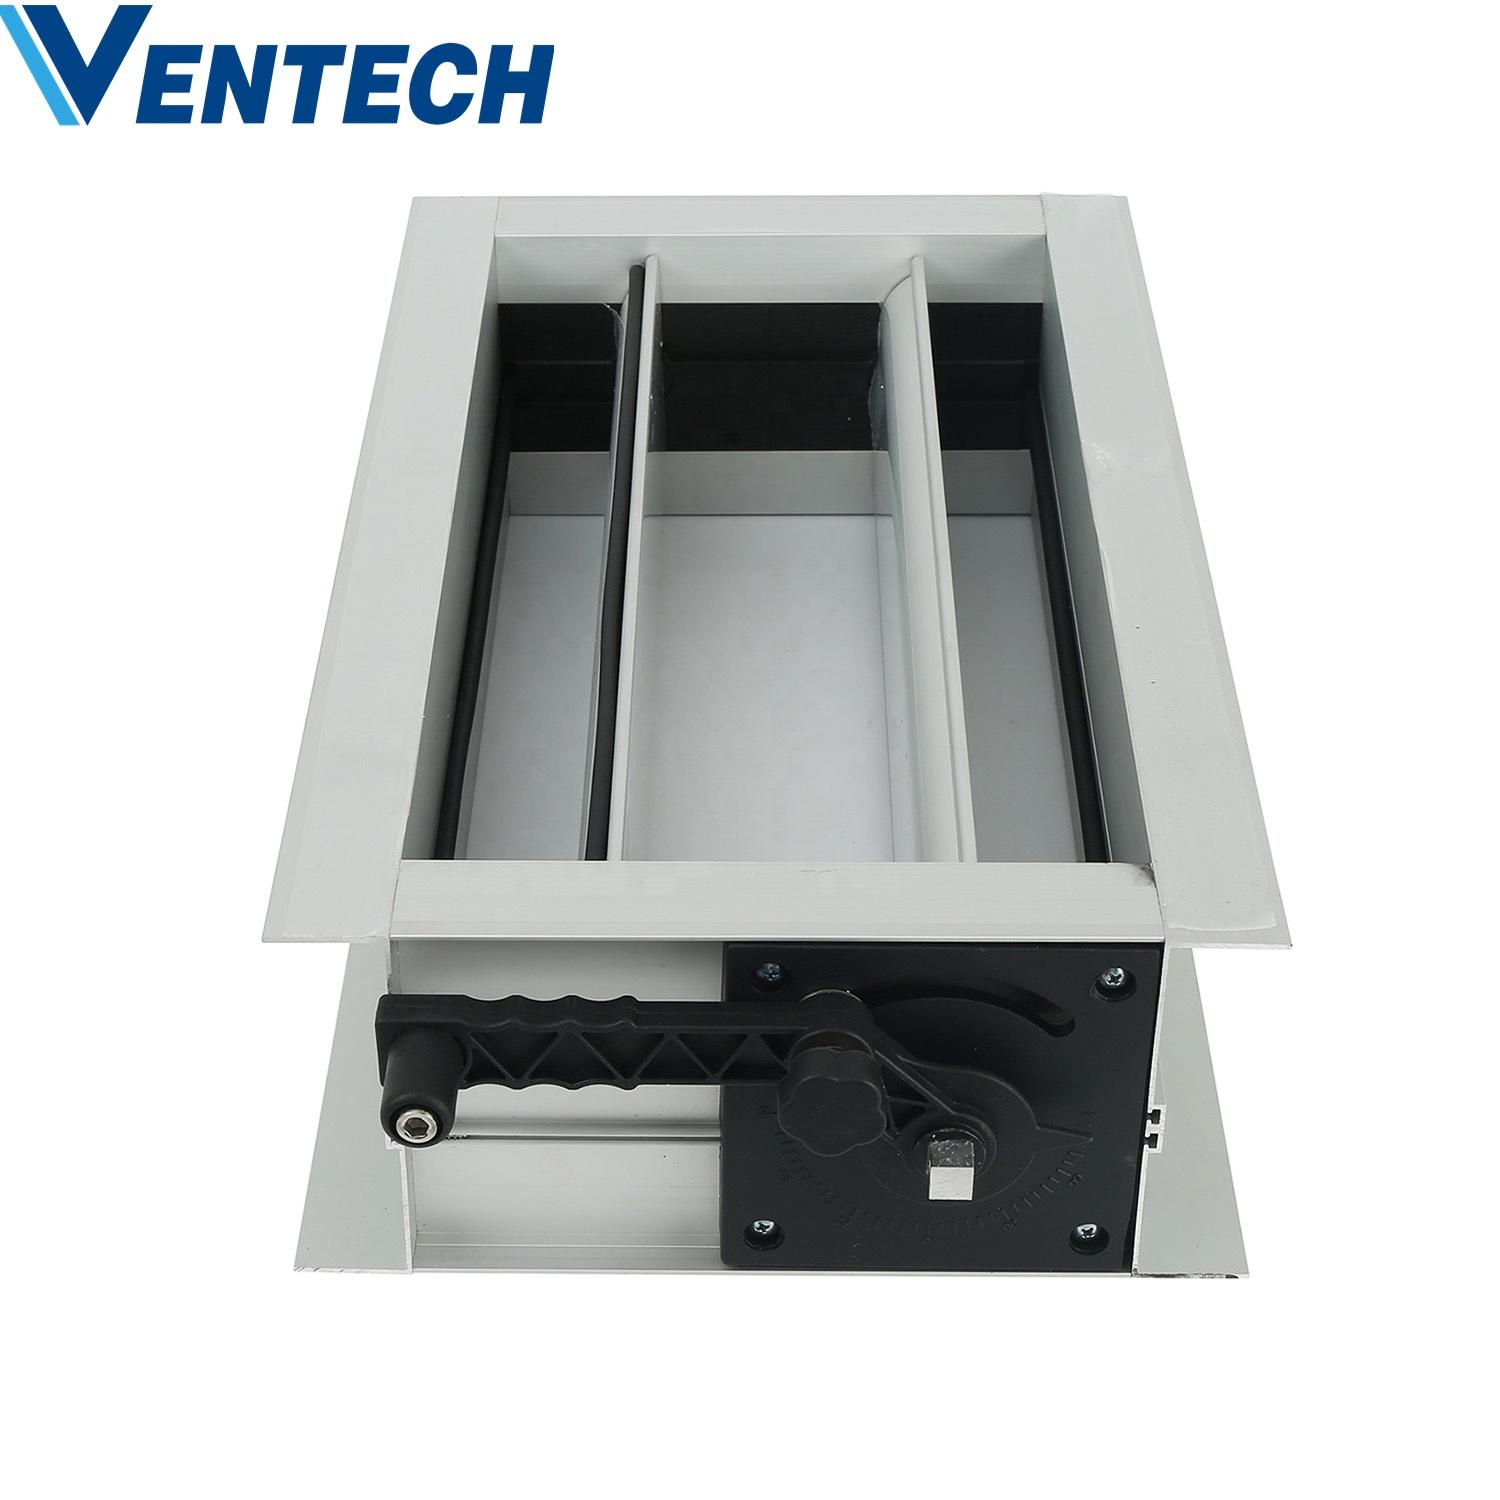 Air Conditioning System Air Ducting Opposed Blades Volume Control Dampers in Hvac Systems